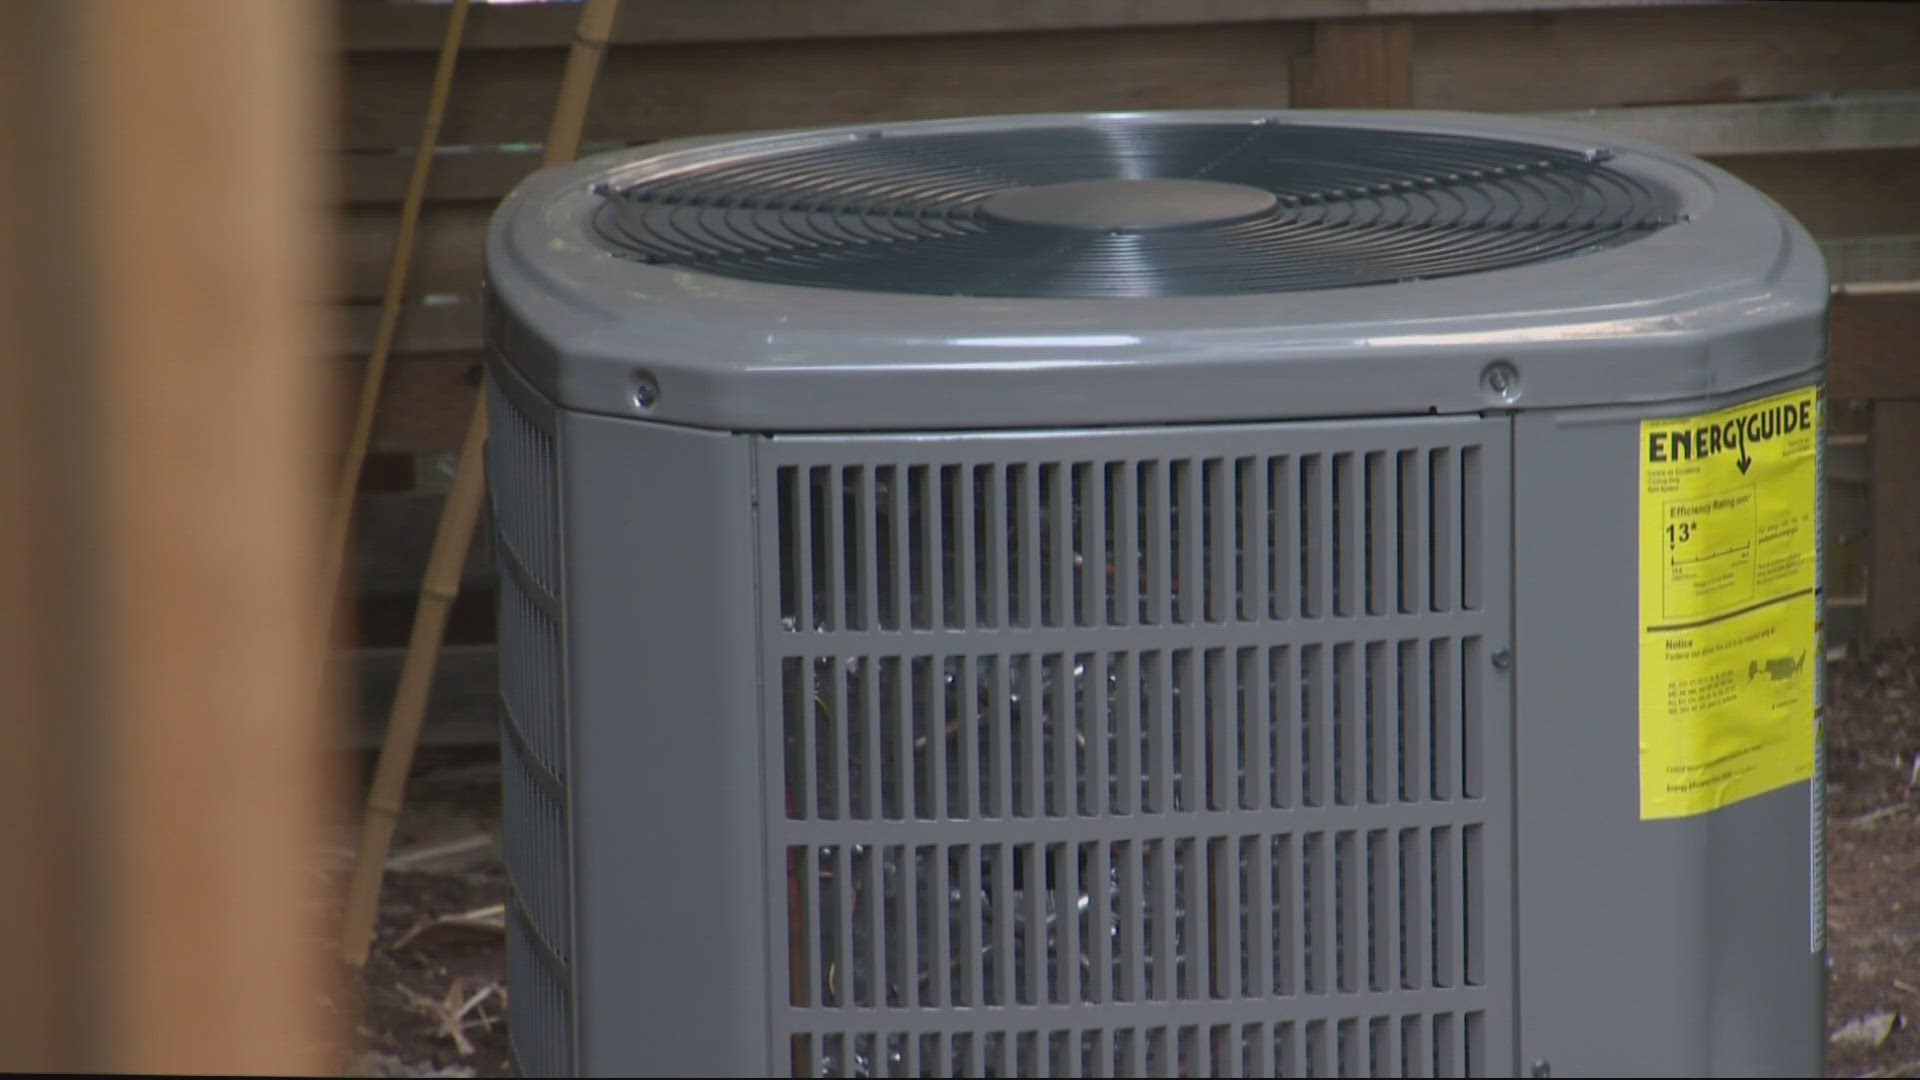 KGW spoke to an energy counselor with Clark Public Utilities in Vancouver who gave tips on how to be efficient while staying cool.